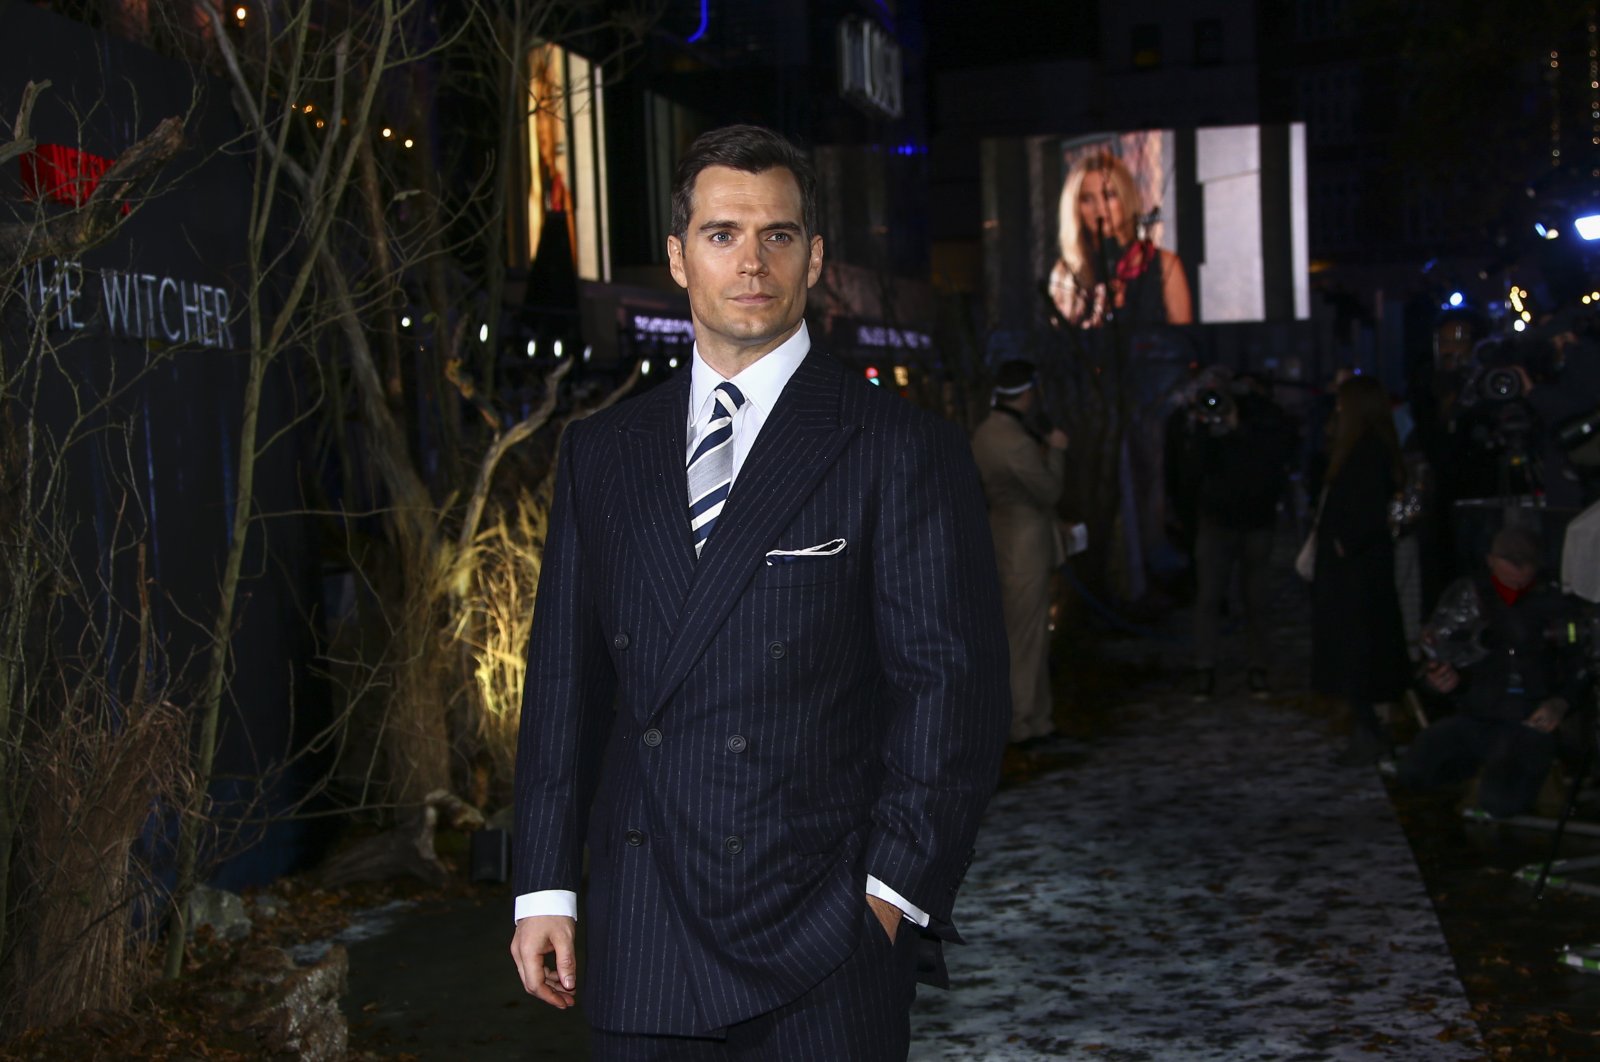 Henry Cavill poses for photographers upon arrival at the world premiere for the second season of “The Witcher” in London, U.K., Dec. 1, 2021. (AP Photo)